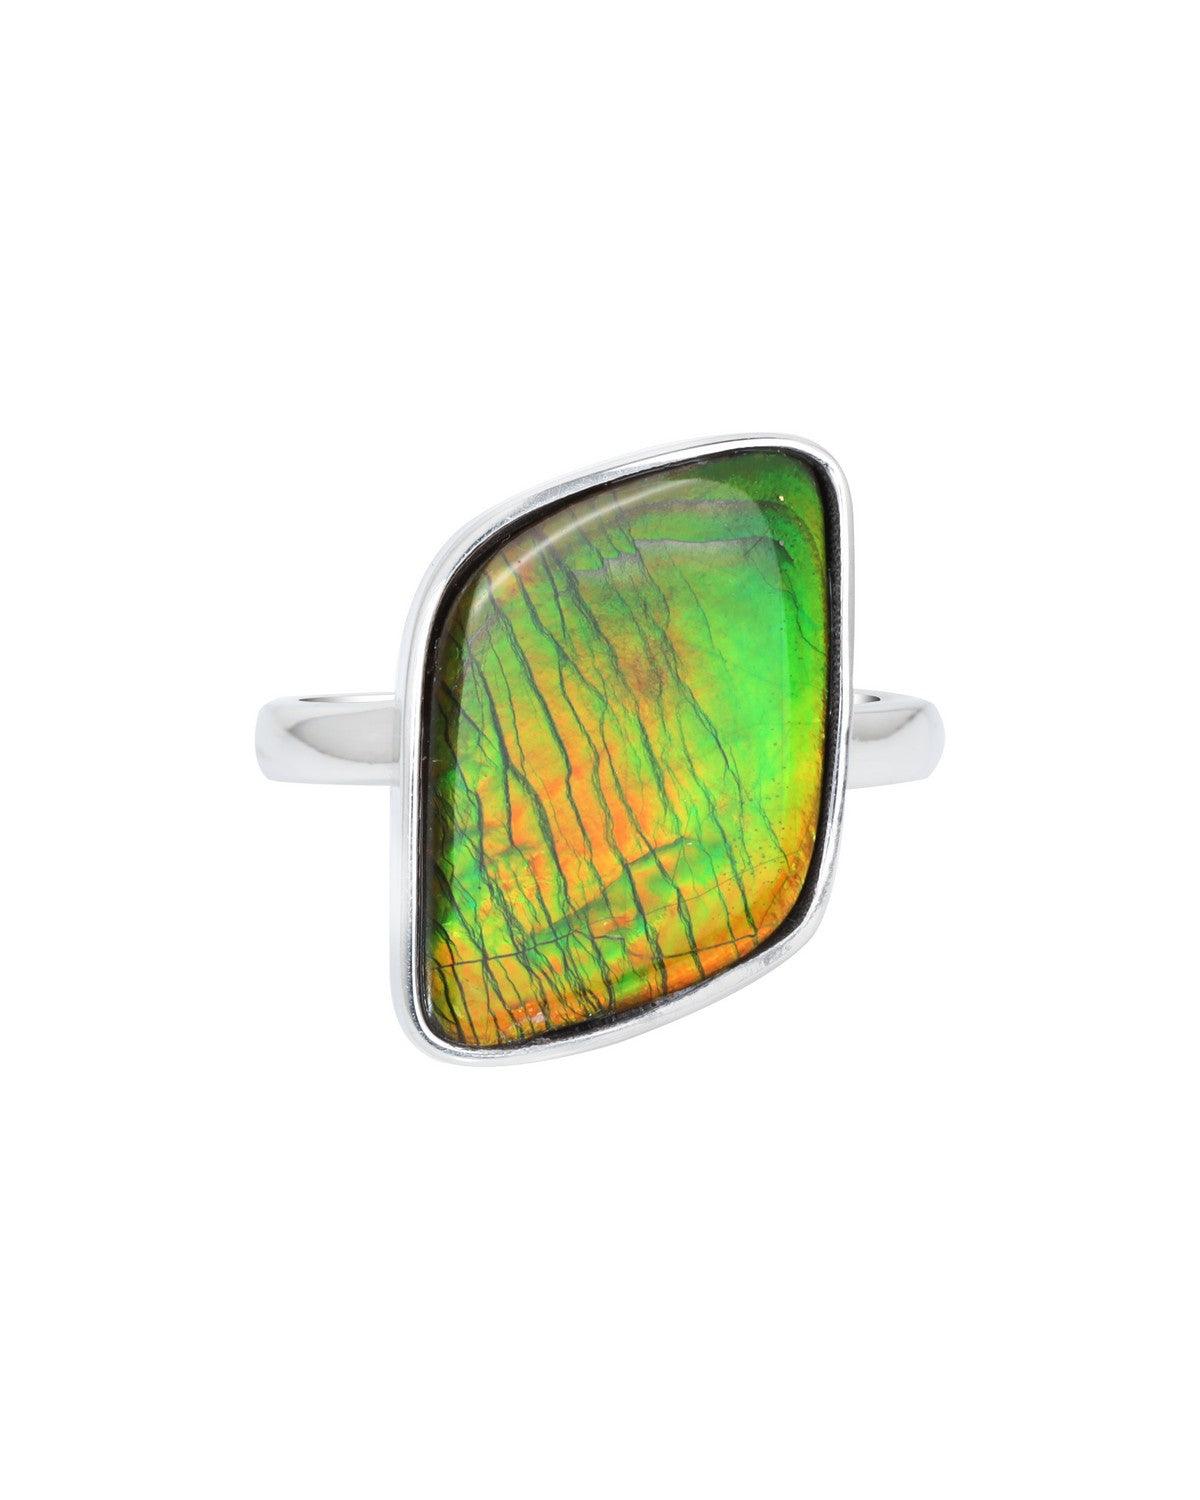 11.25 Ct. Ammolite Ring Solid 925 Sterling Silver Jewelry - YoTreasure